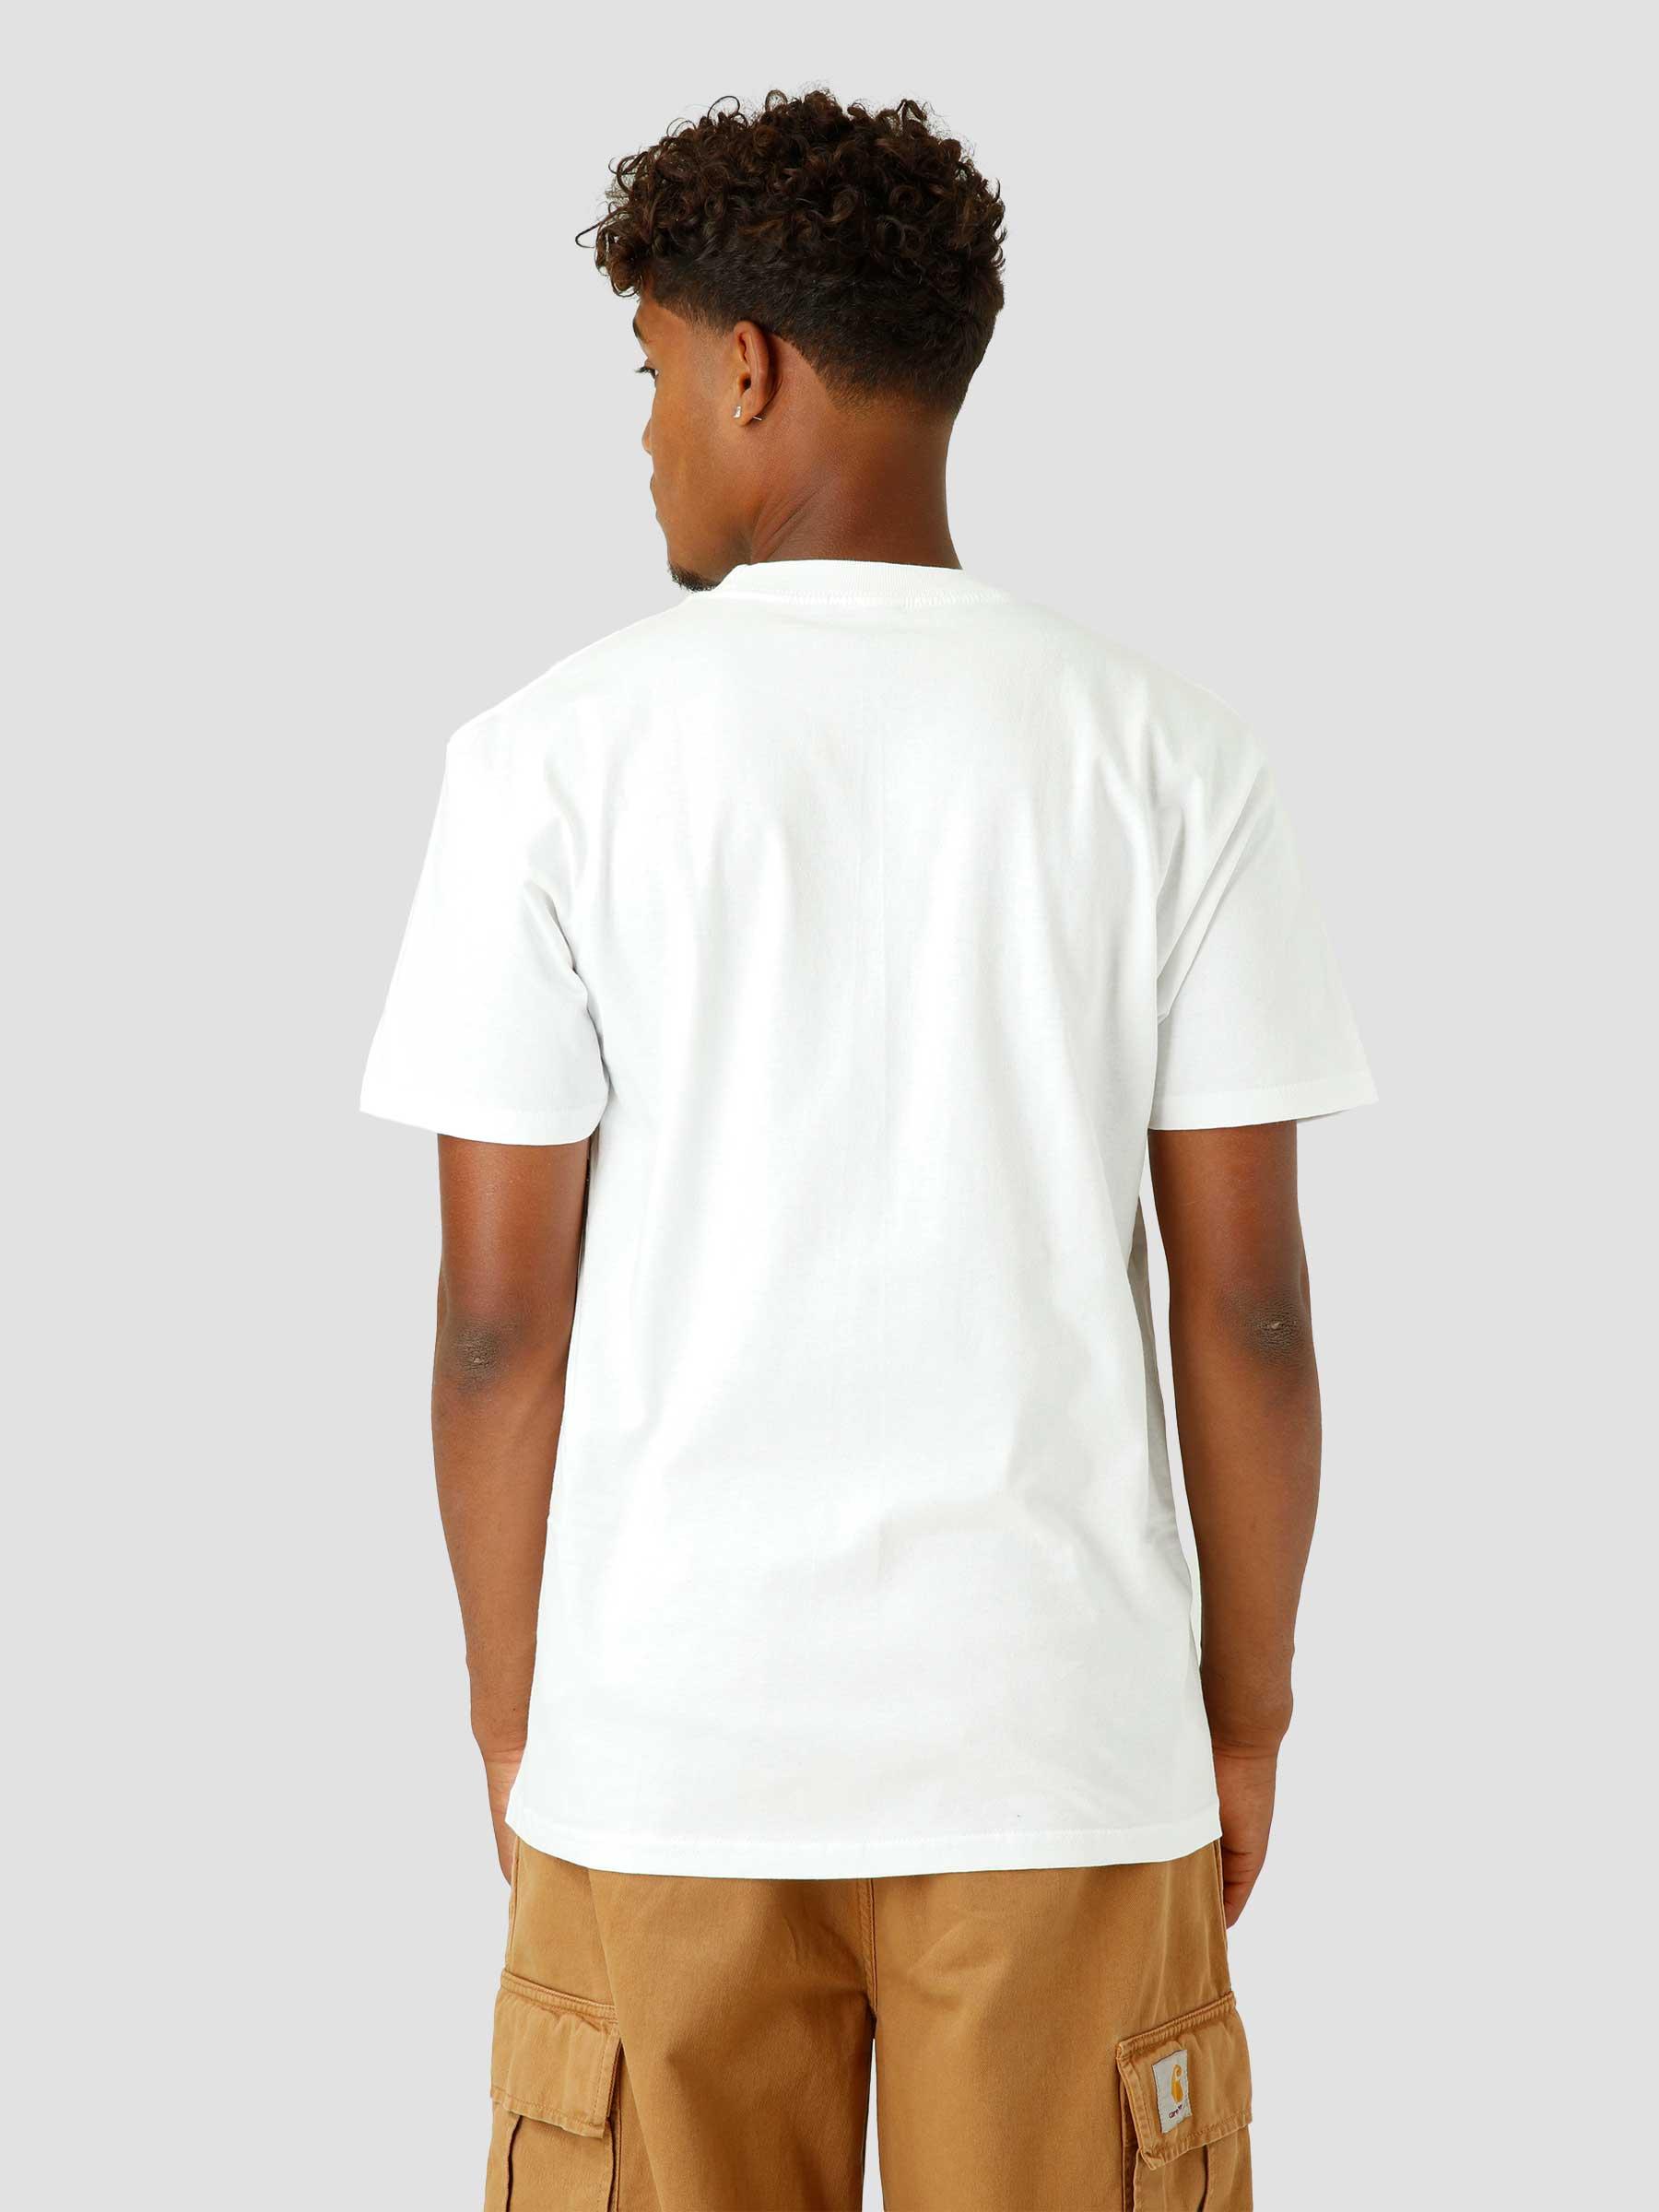 Obey Paws T-shirt White 165263189